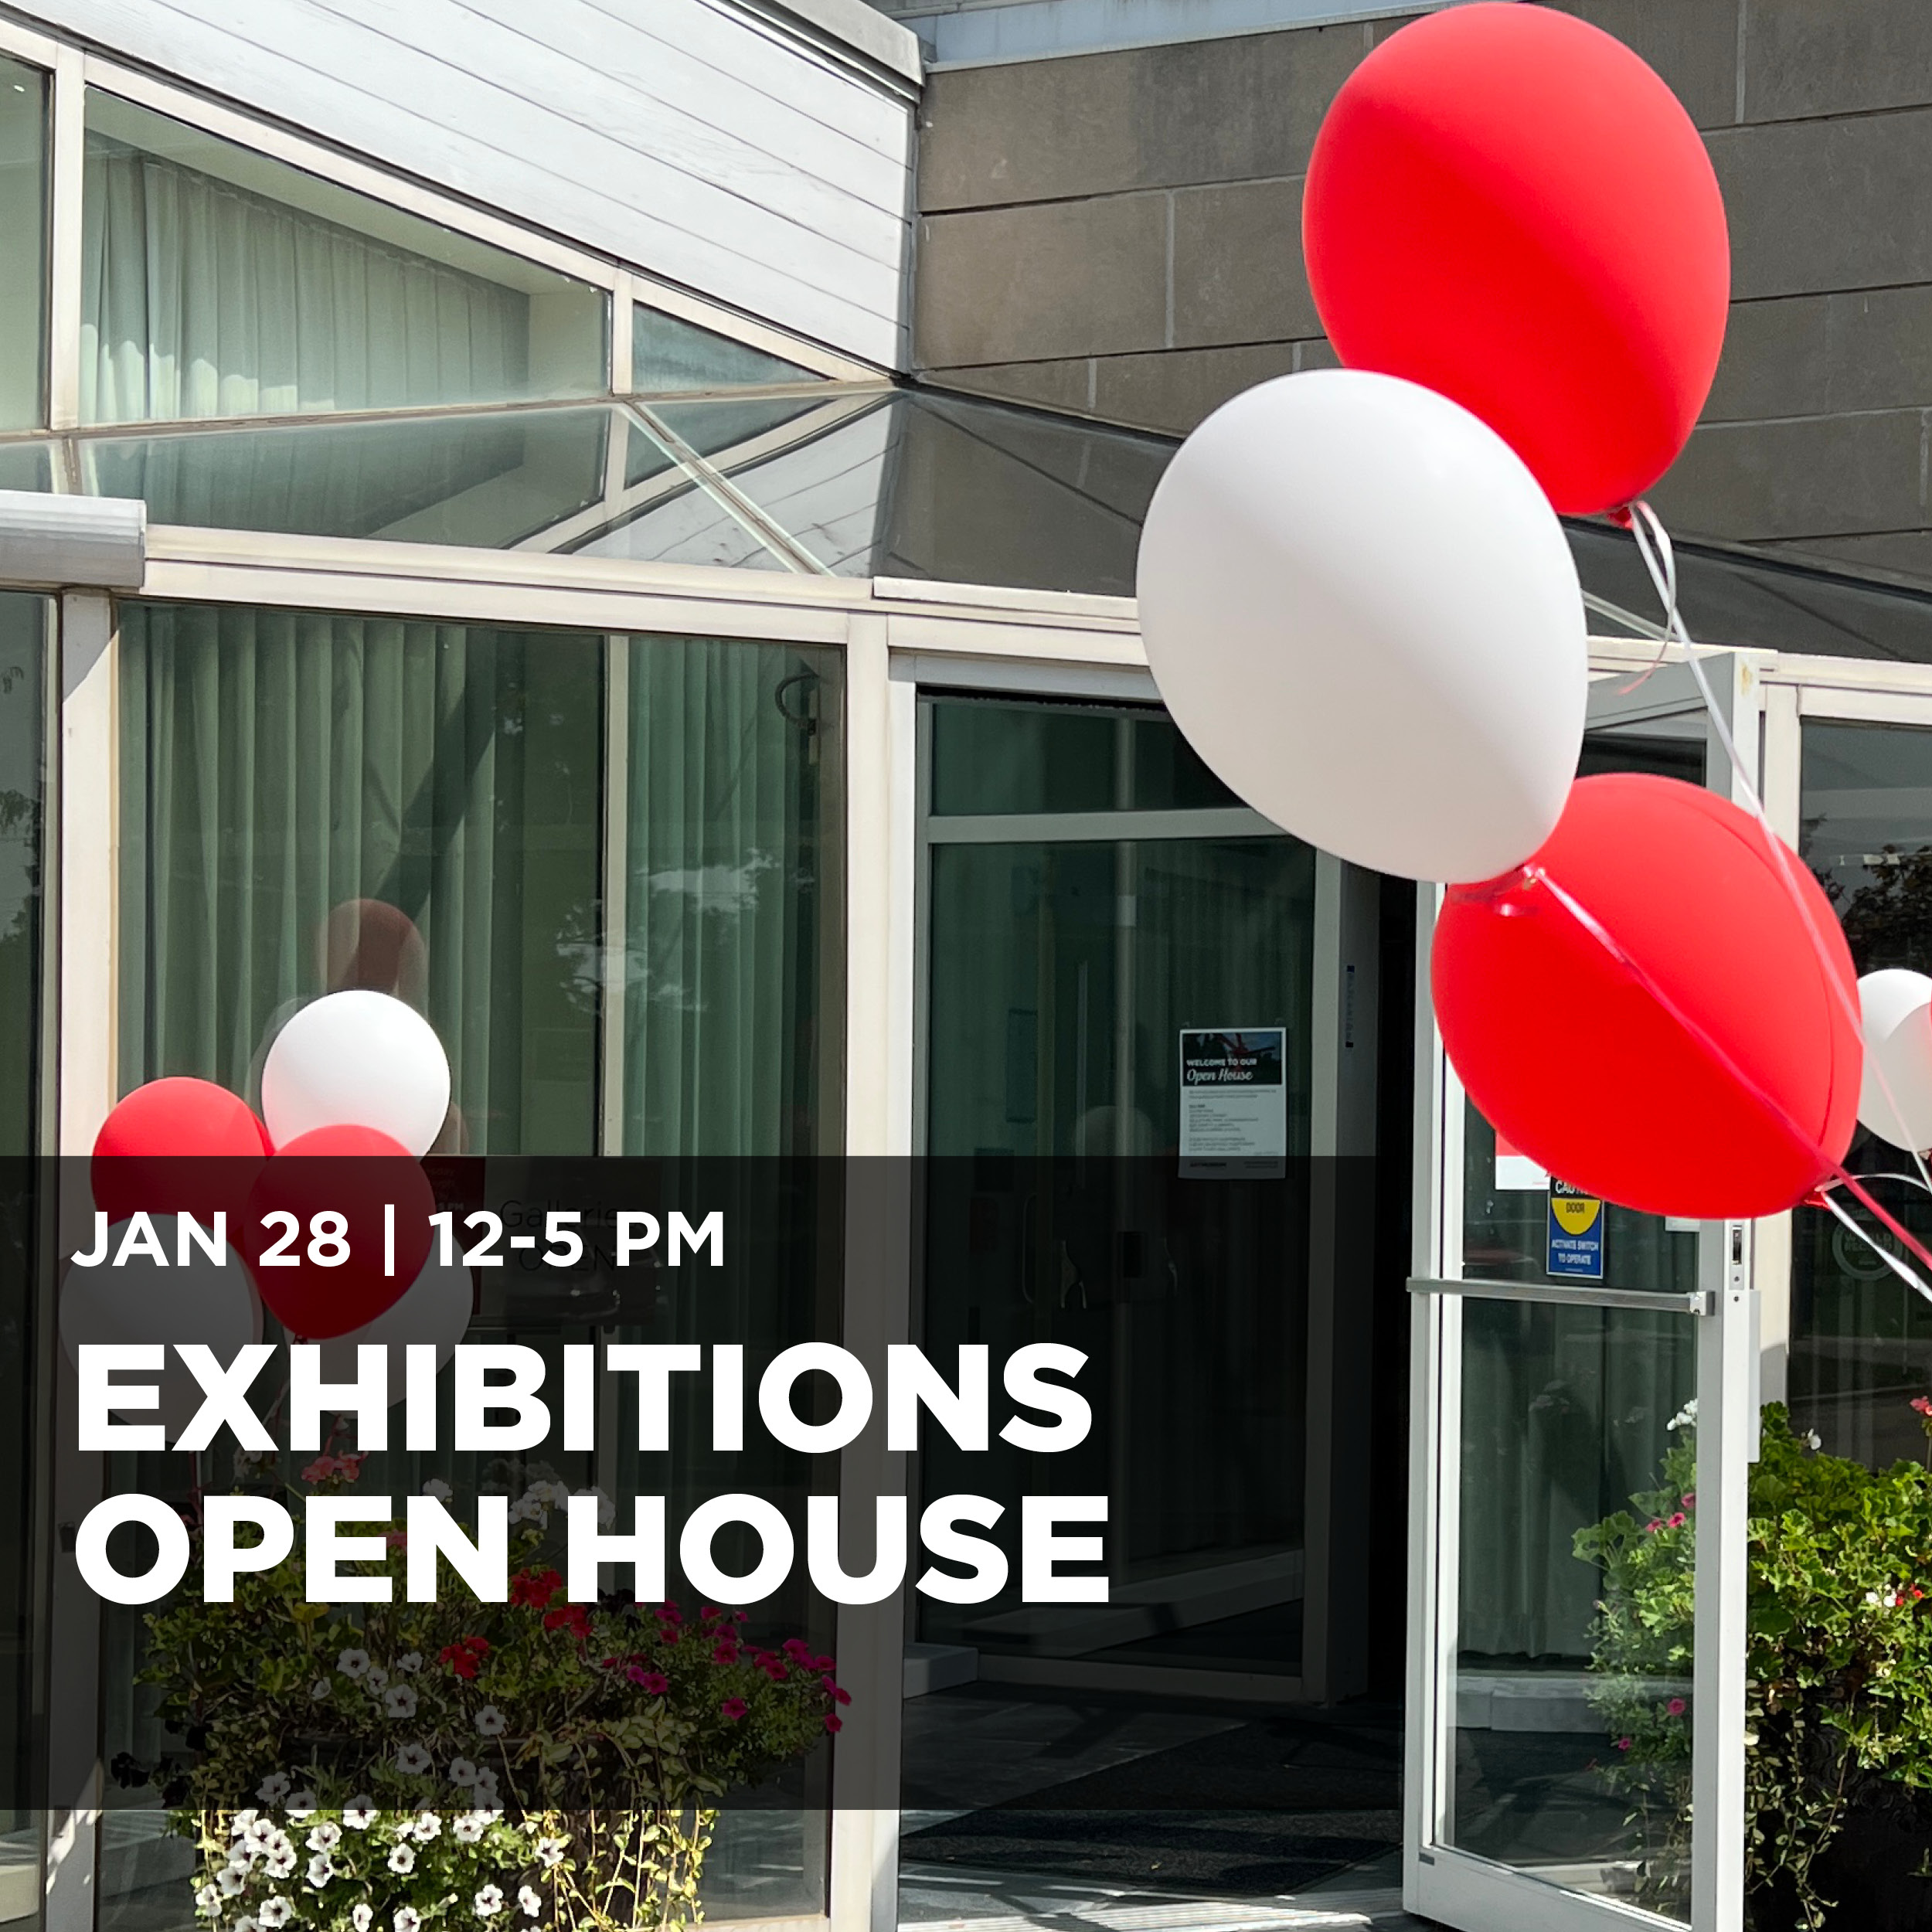 Open House Saturday January 28 from 12-5 PM